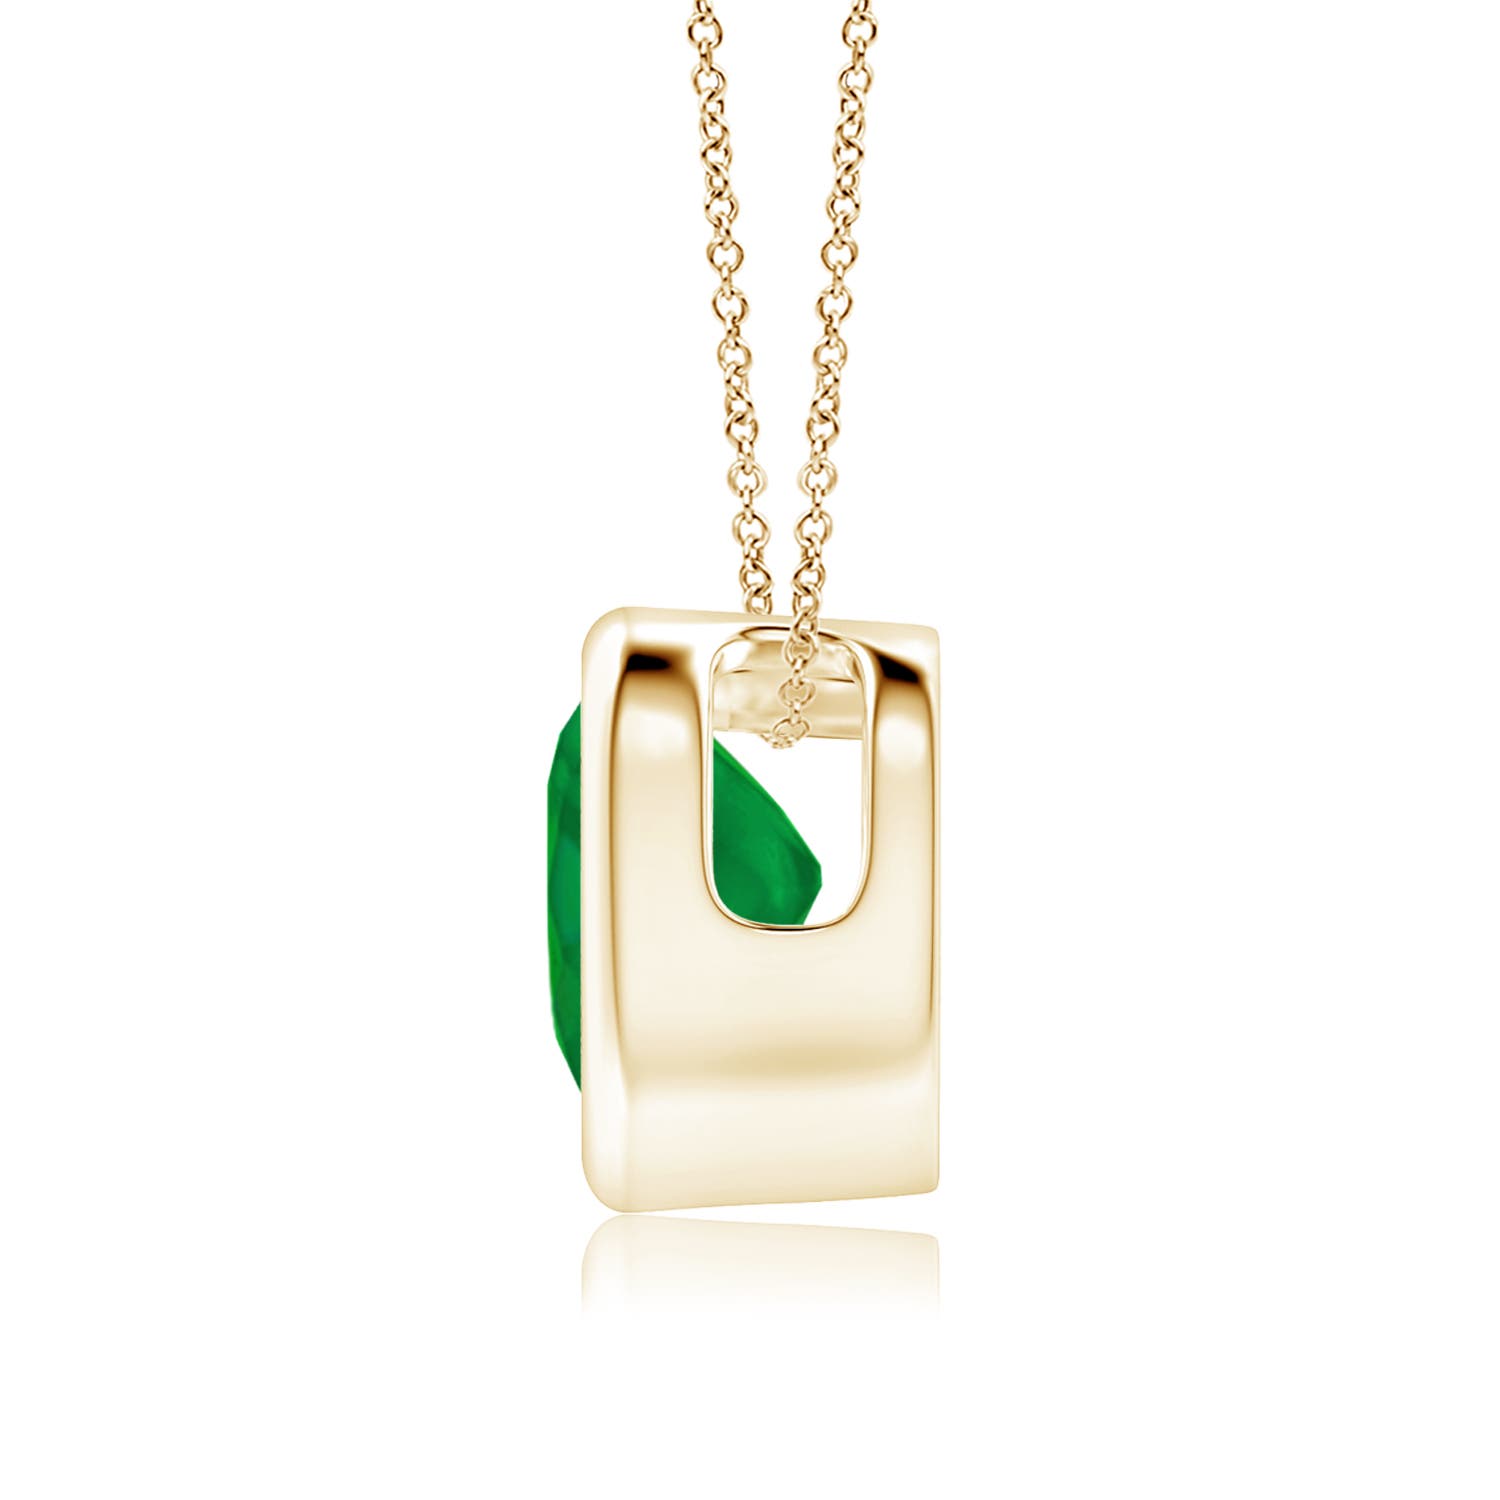 AA - Emerald / 0.6 CT / 14 KT Yellow Gold